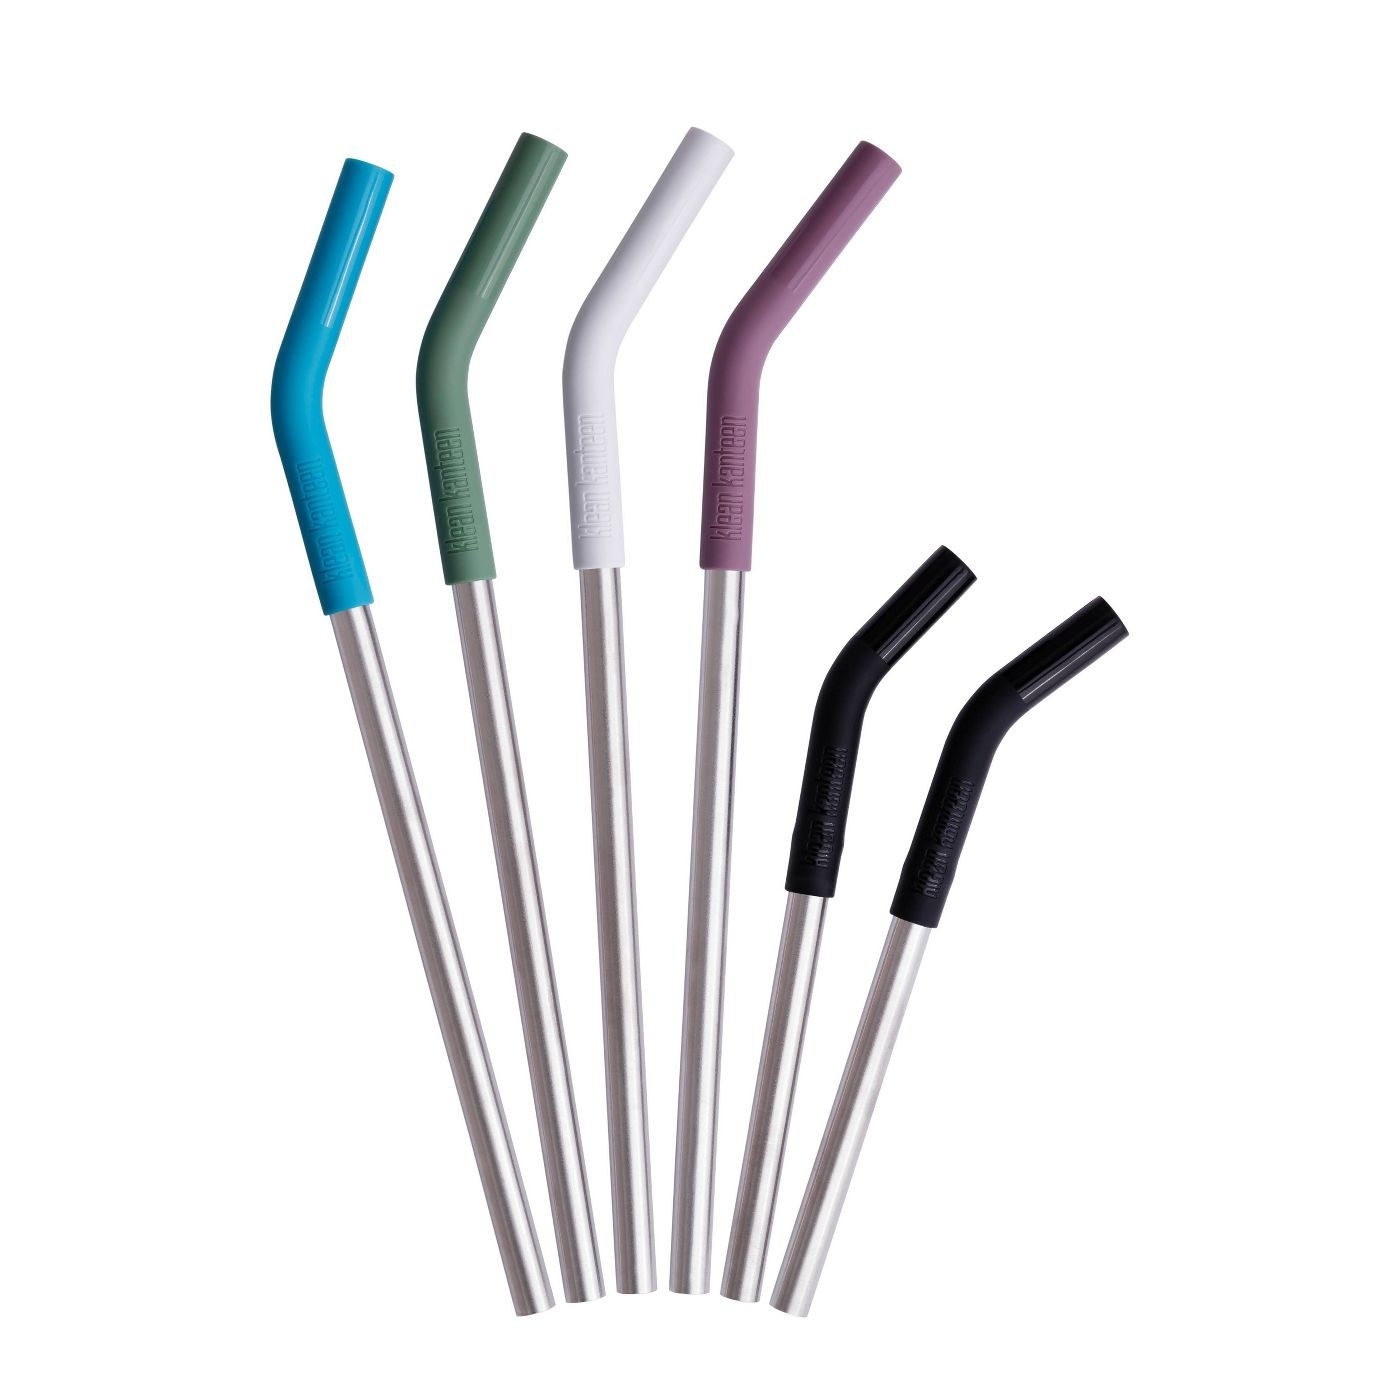 Six metal straws with different colored markers. Two straws are smaller and for cocktails or kids